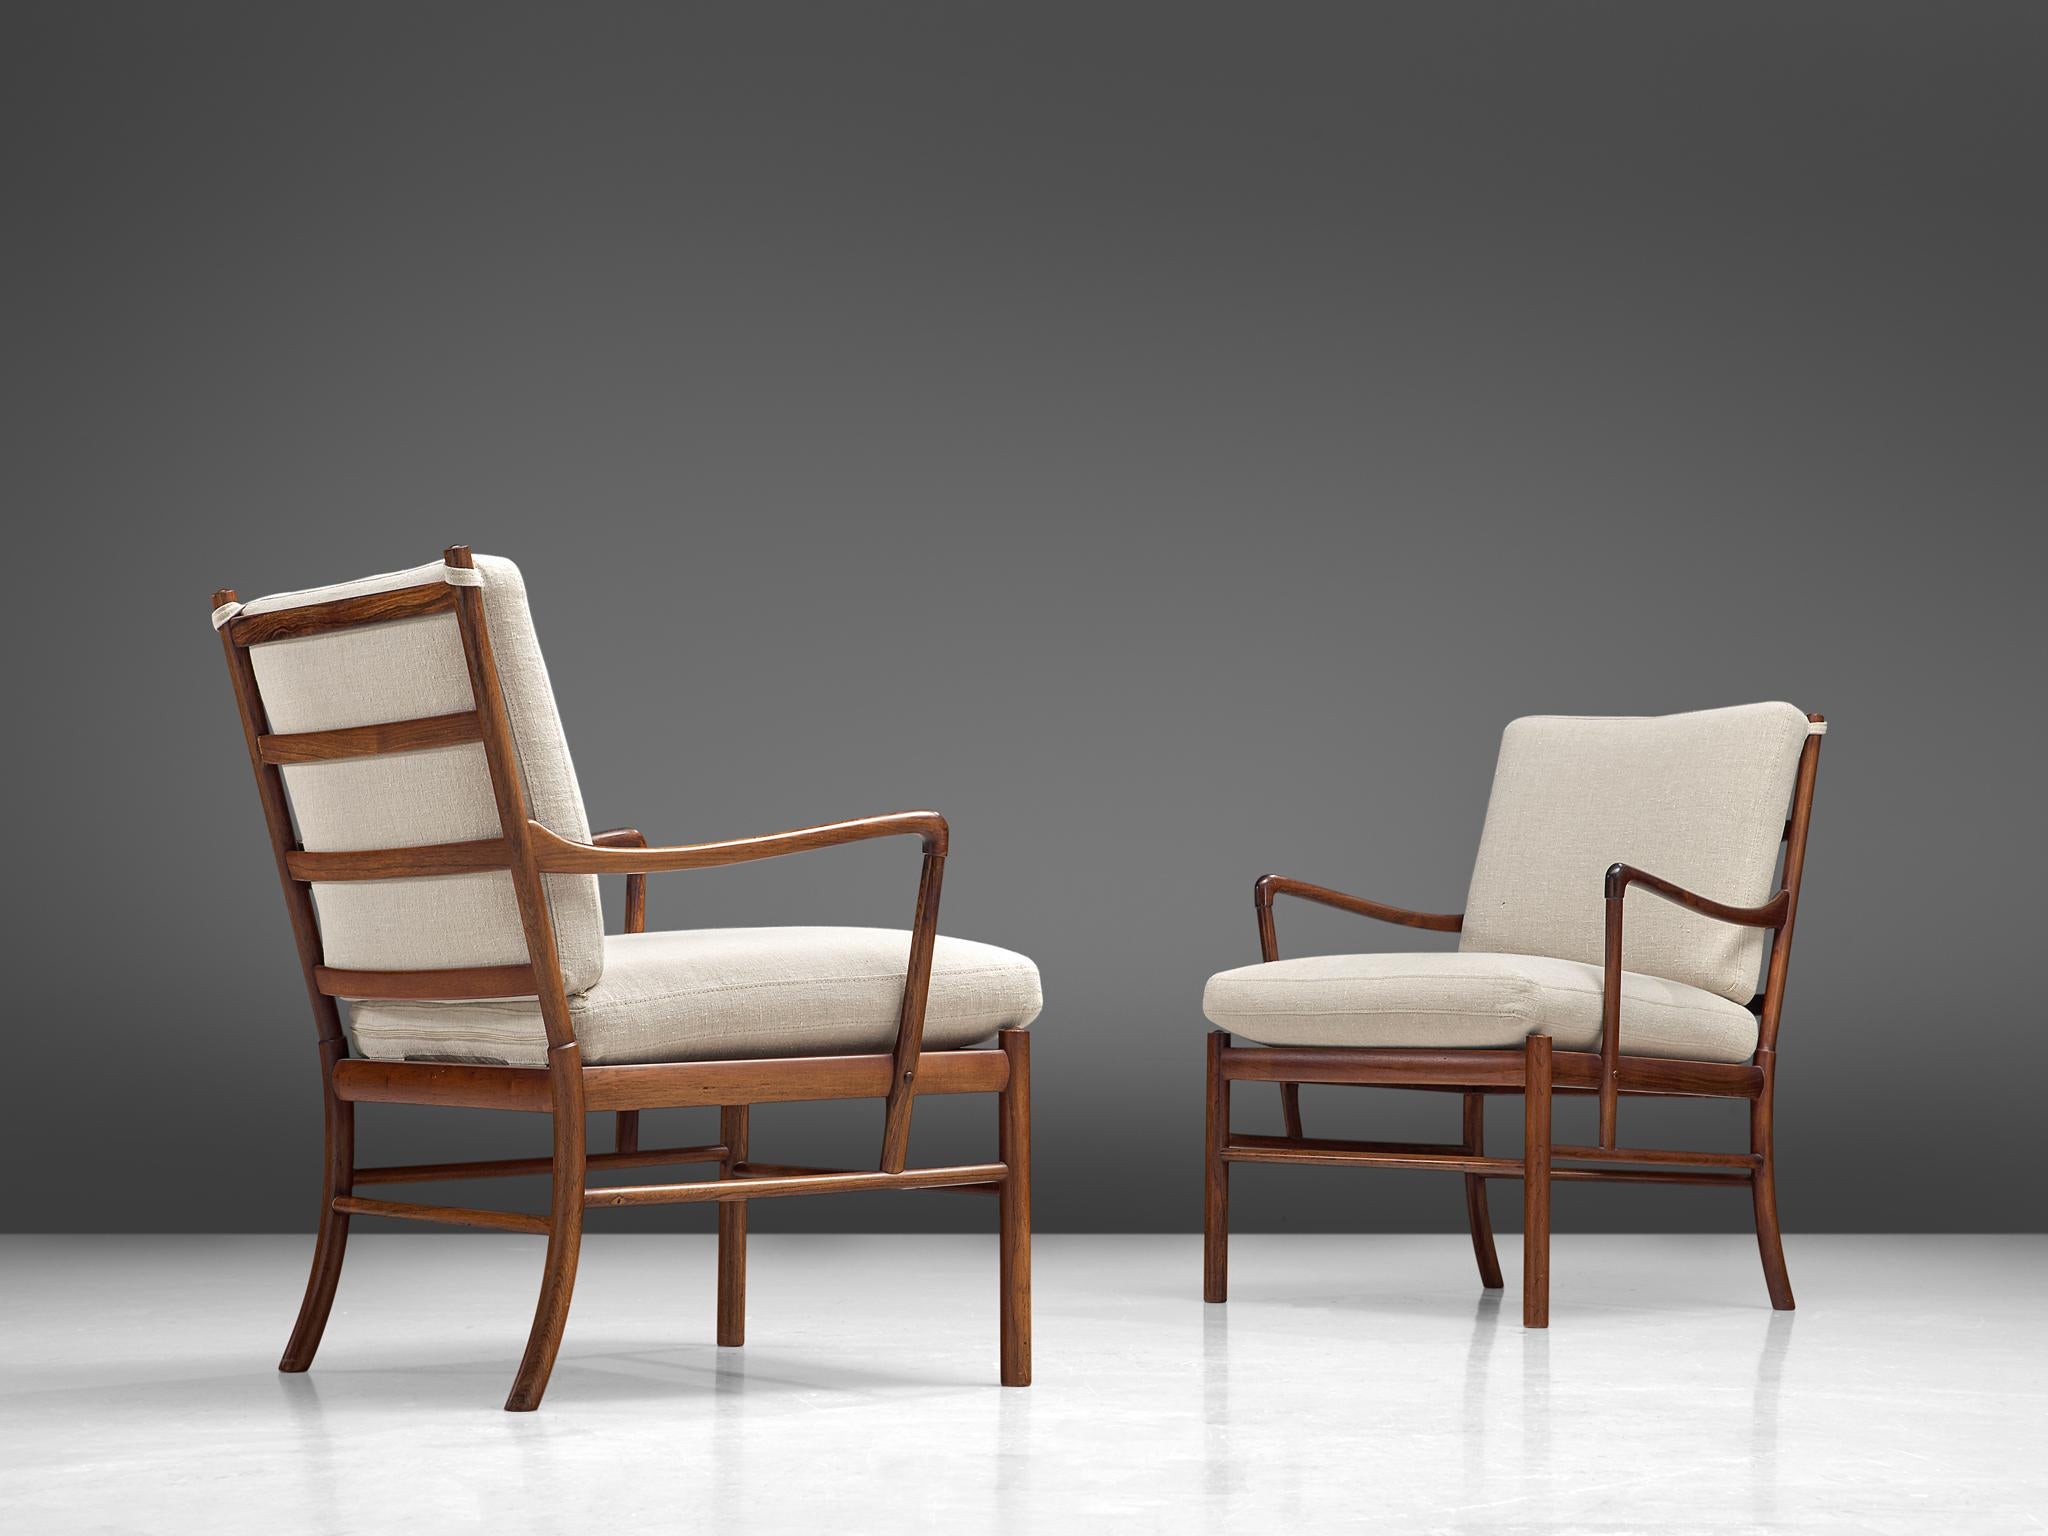 Ole Wanscher for Poul Jeppesen, pair of 'Colonial' armchairs, rosewood, cane and fabric, Denmark, 1949

Elegant pair easy chairs that are executed a slim frame of rosewood, designed by the Dane Ole Wanscher. The lounge chairs feature the great